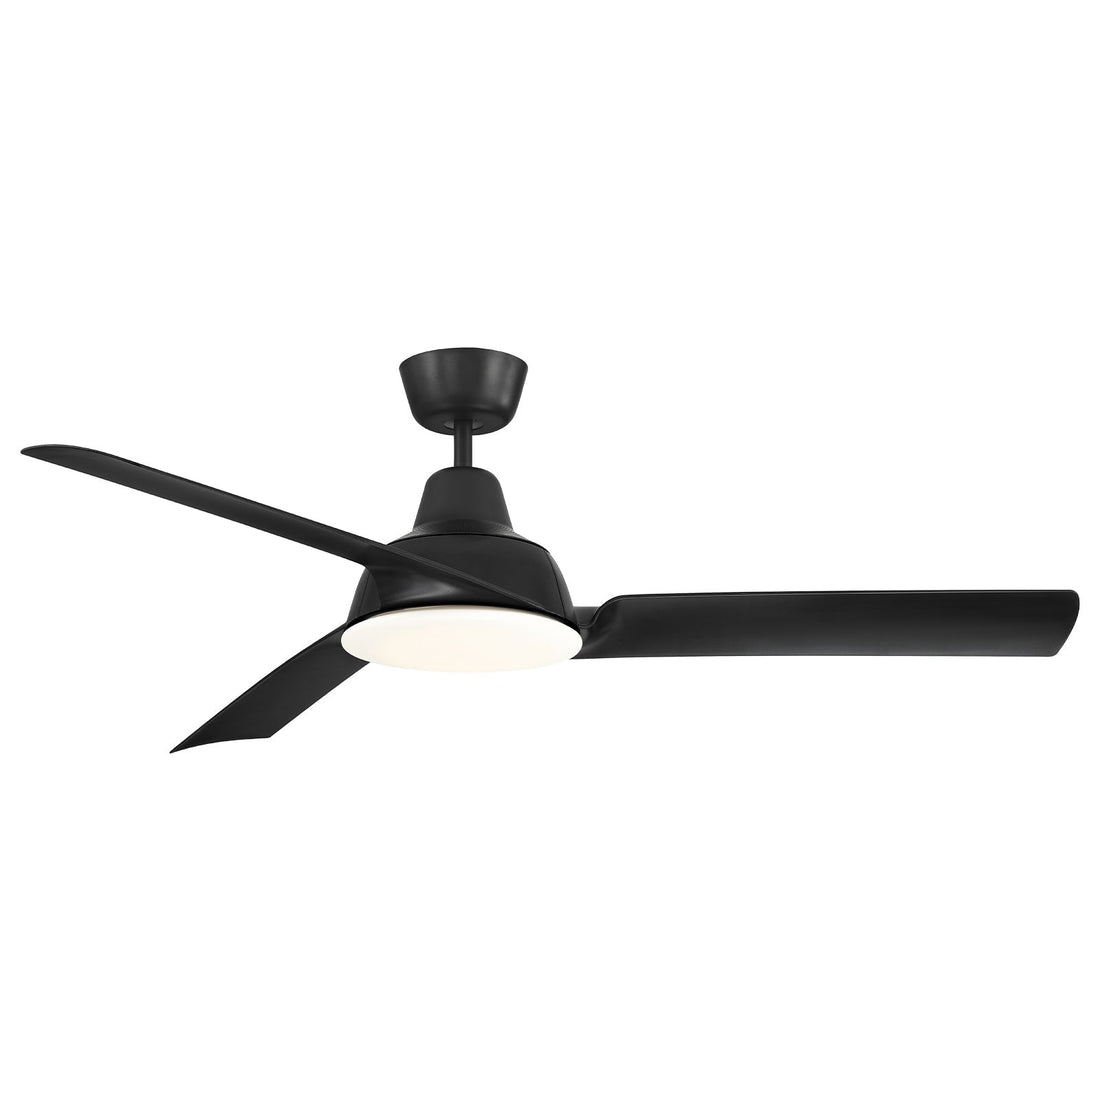 Airventure AC Ceiling Fan with LED Light Mercator